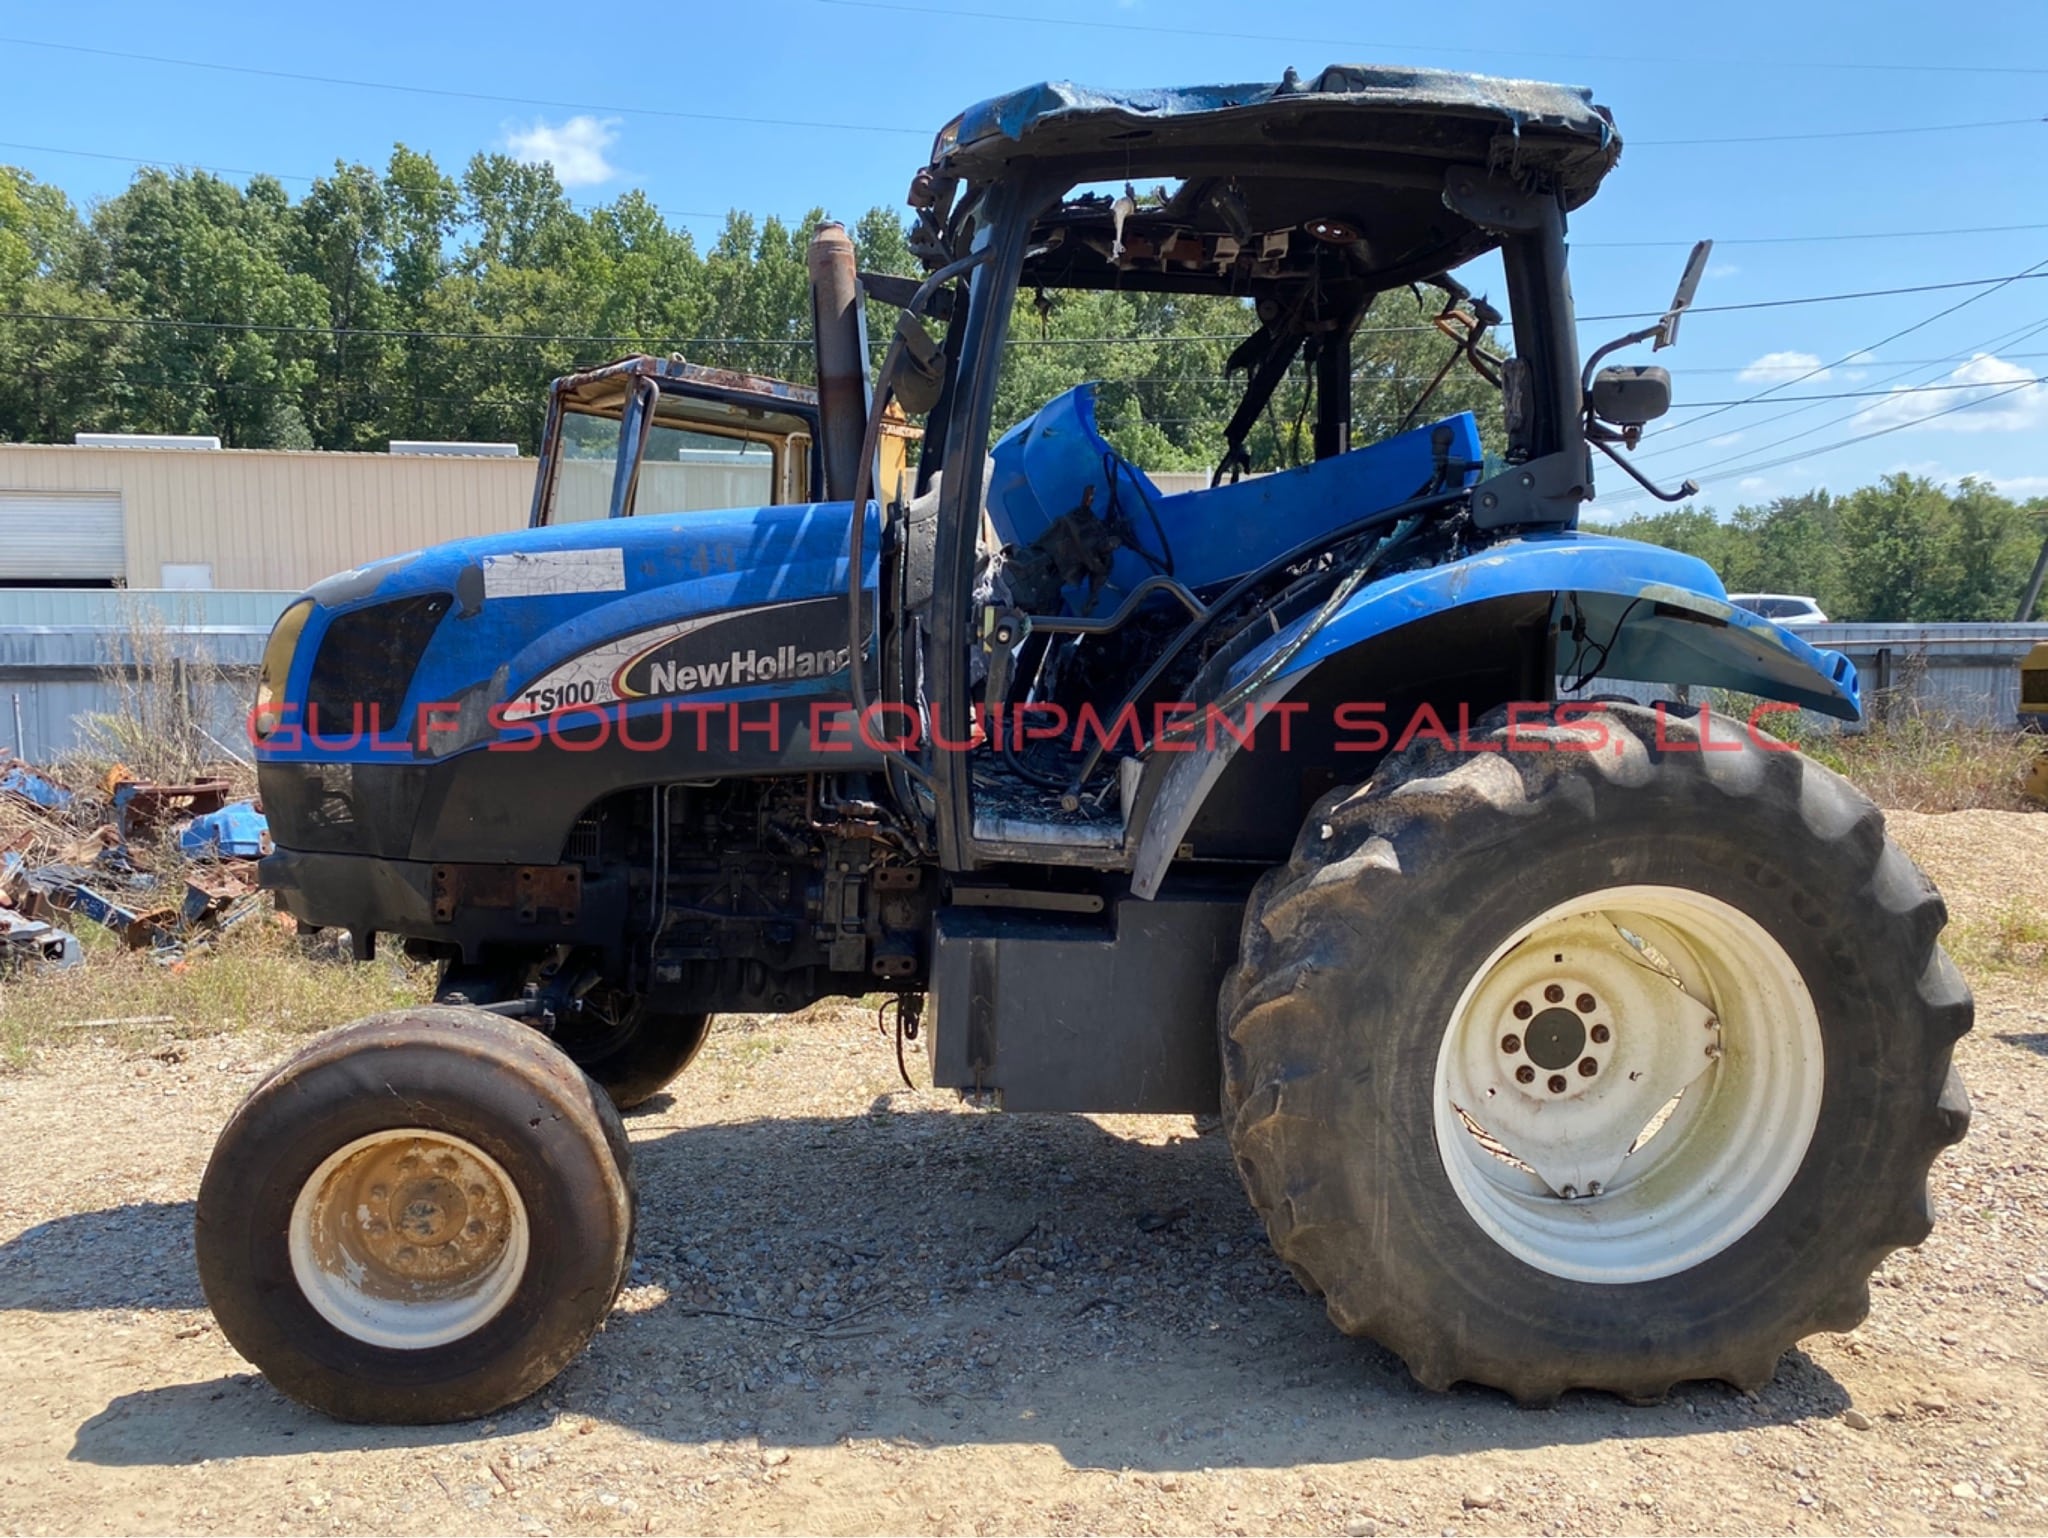 New Holland TS100 Tractor in for Parts